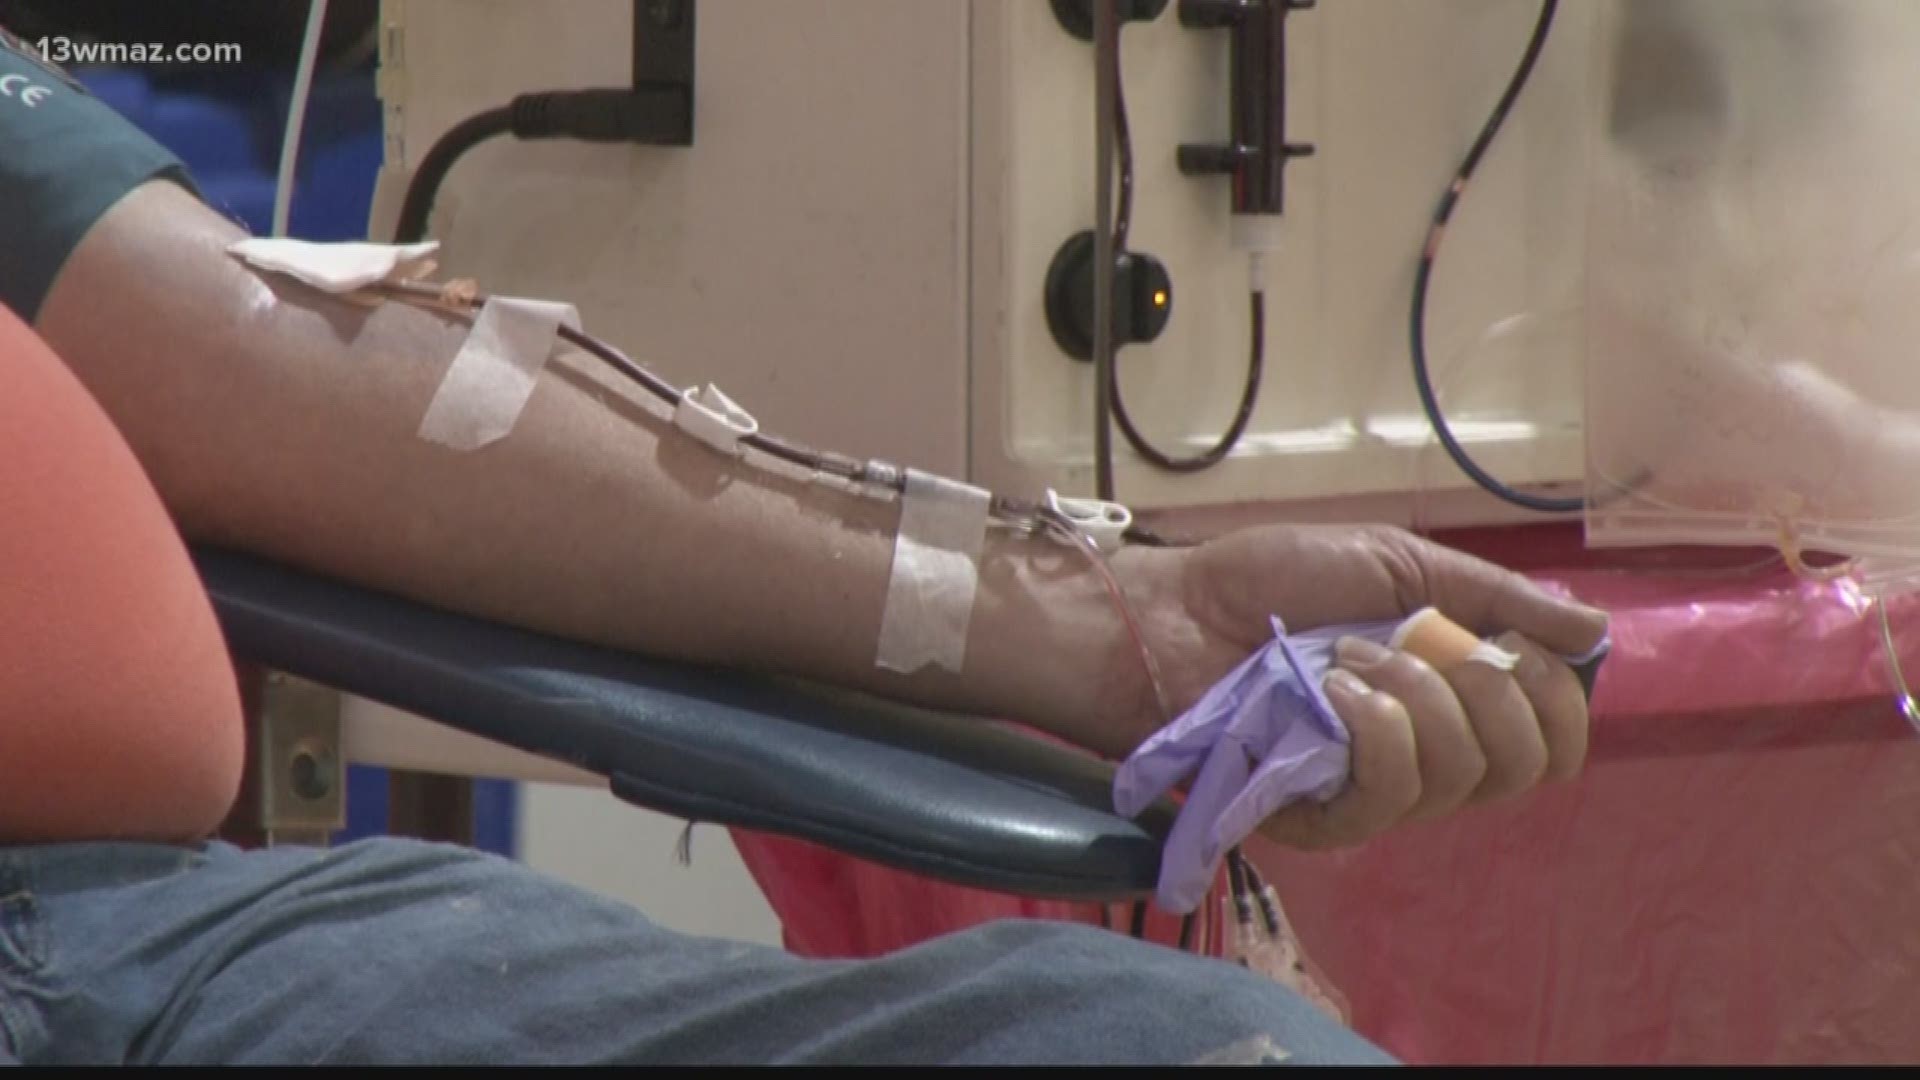 Thousands of blood drives have been cancelled nation-wide because of COVID-19.